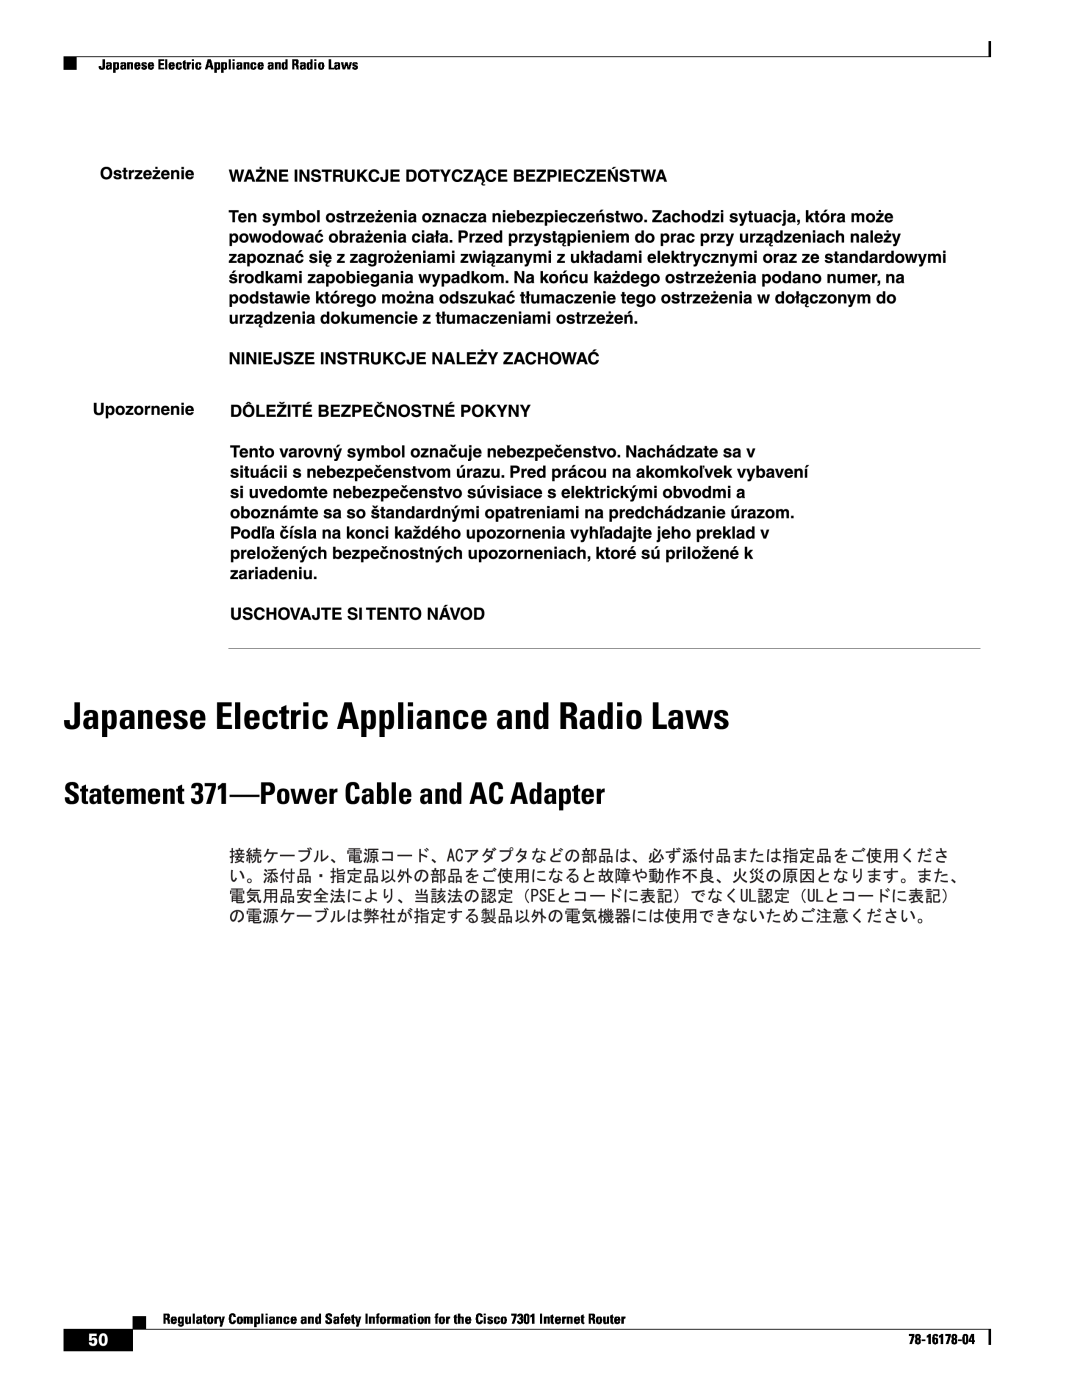 Cisco Systems CISCO7301 Japanese Electric Appliance and Radio Laws, Statement 371-Power Cable and AC Adapter, 78-16178-04 